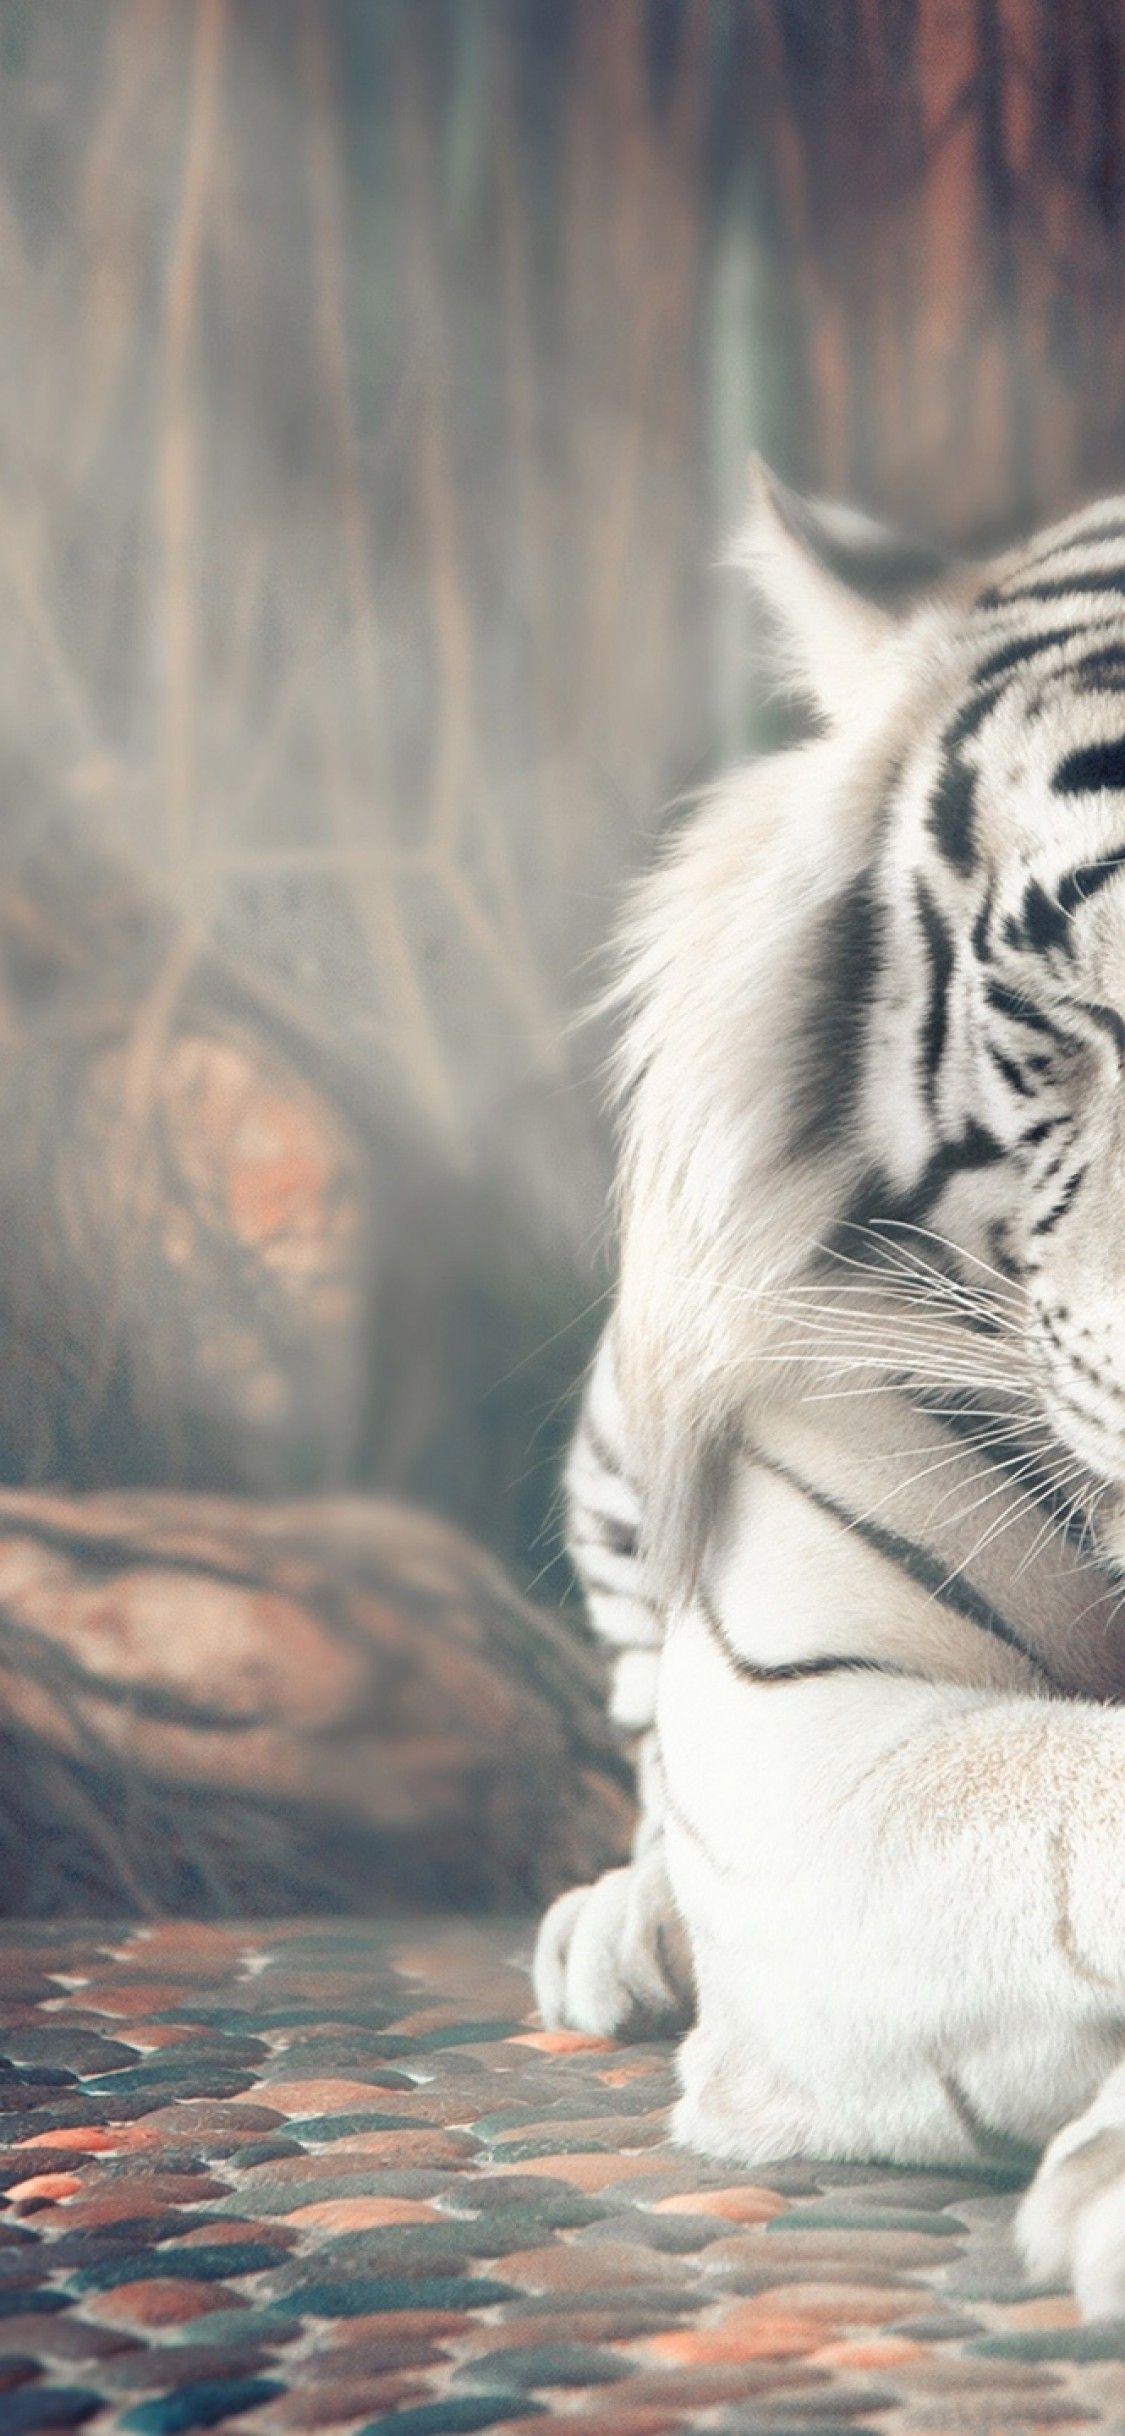 White Tiger Iphone Wallpapers Top Free White Tiger Iphone Backgrounds Wallpaperaccess